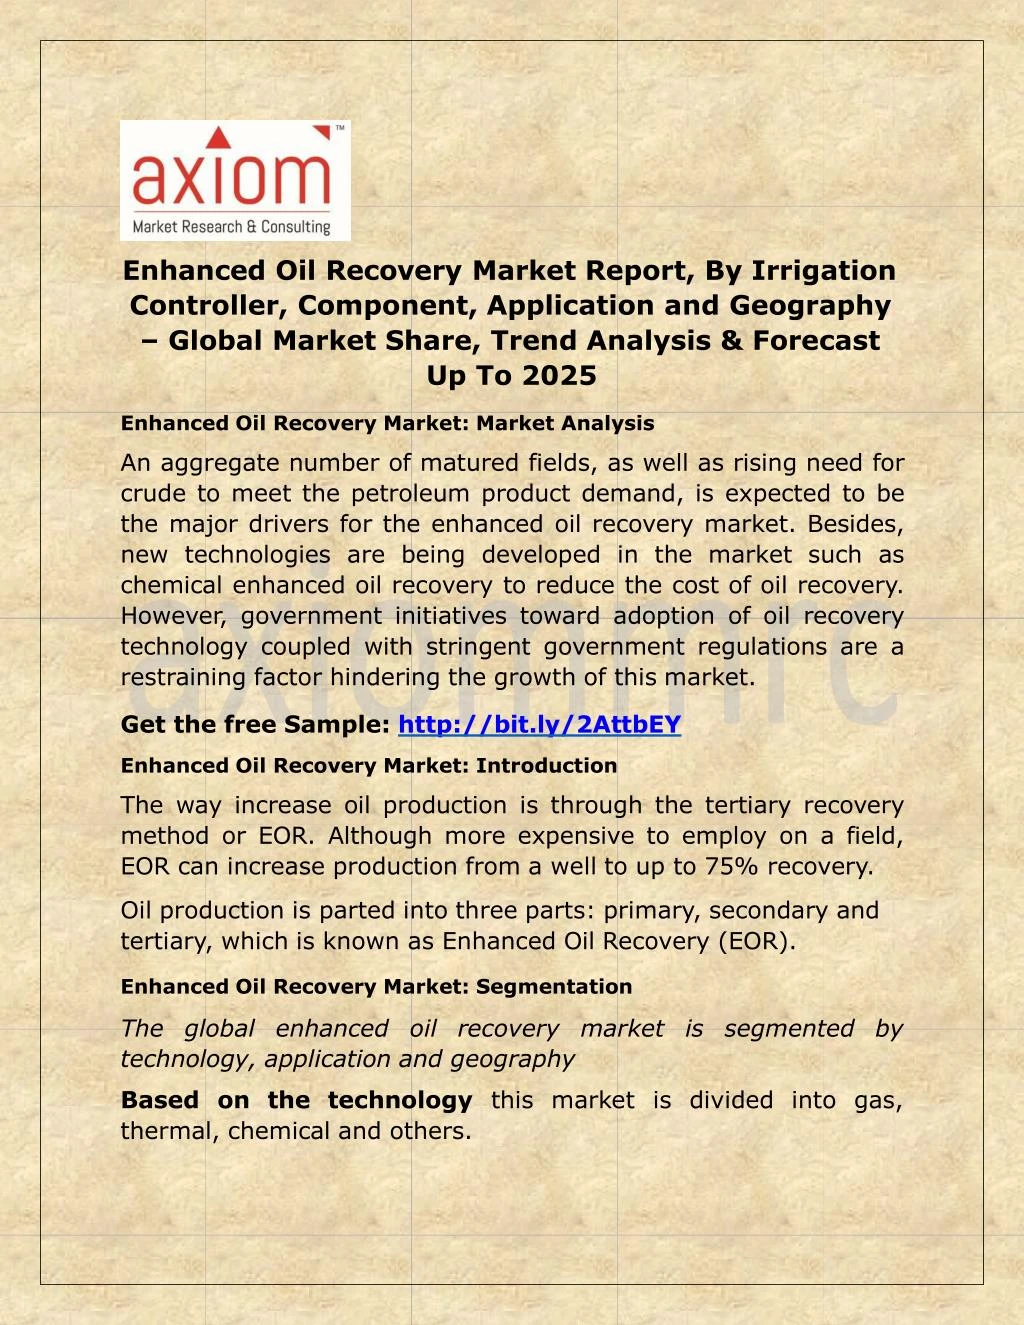 enhanced oil recovery market report by irrigation